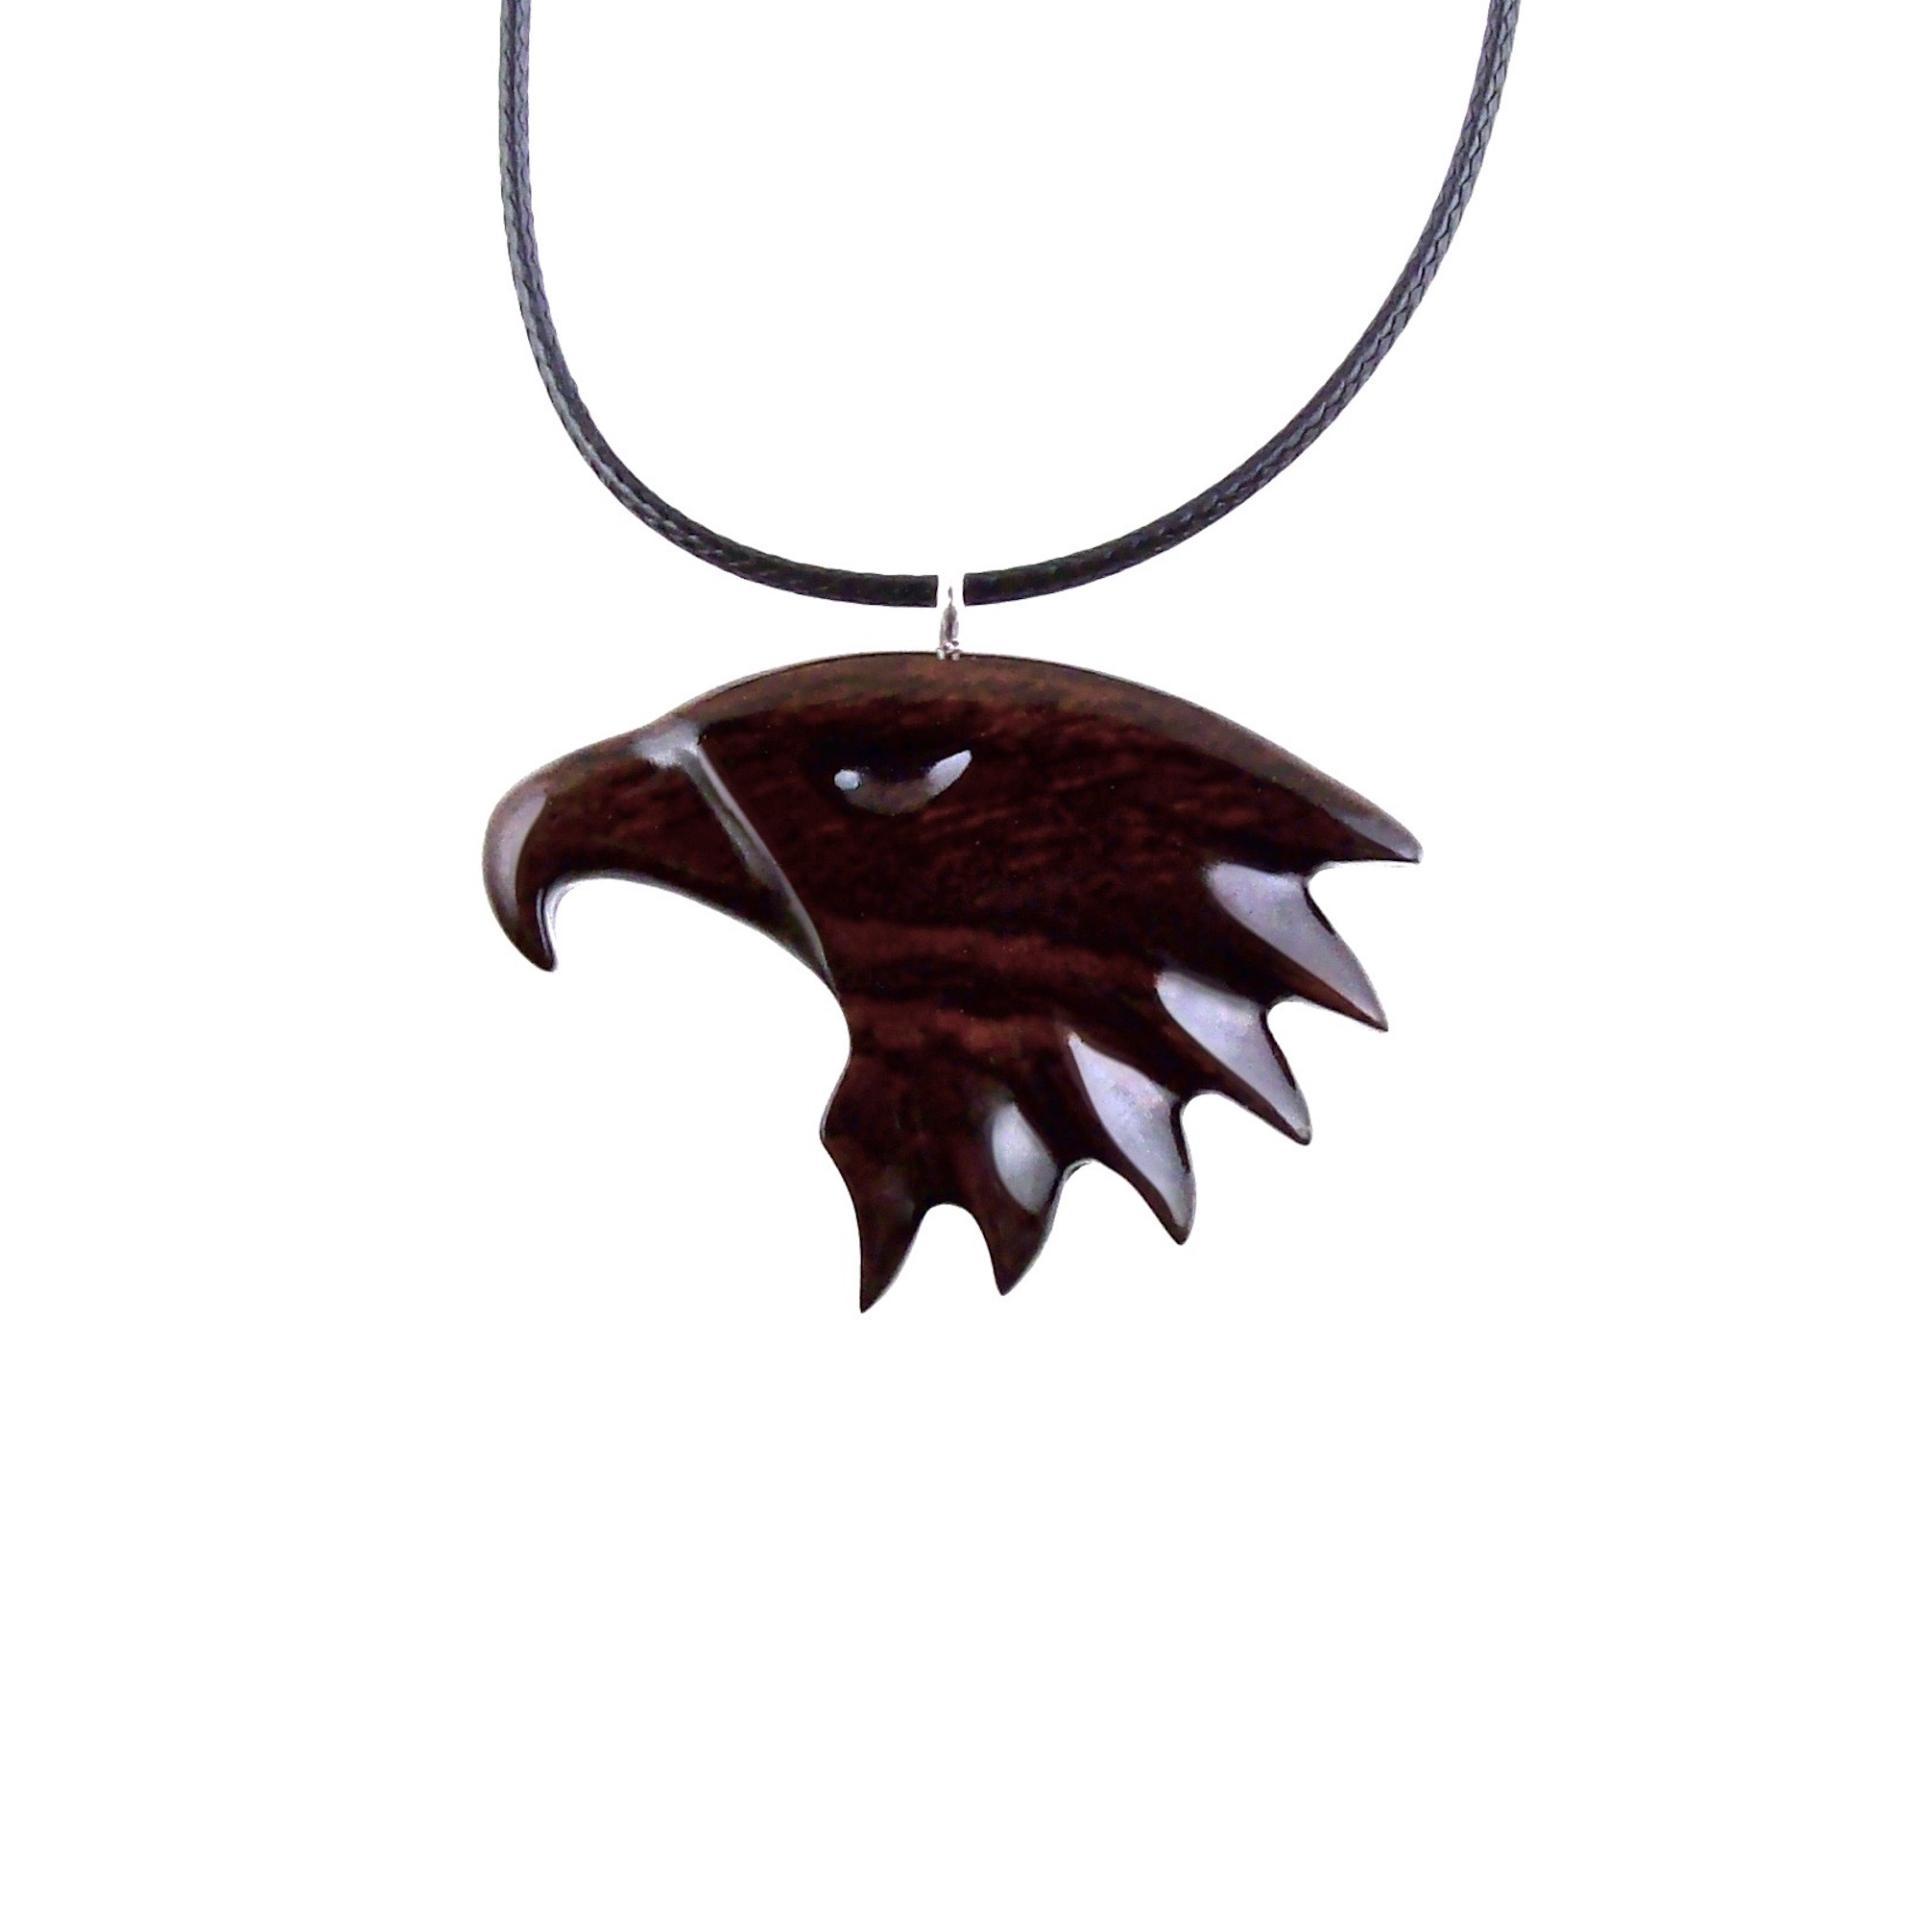 Eagle Necklace, Hand Carved Wooden Bird of Prey Pendant, Totem Wood Jewelry, One of a Kind Gift for Him